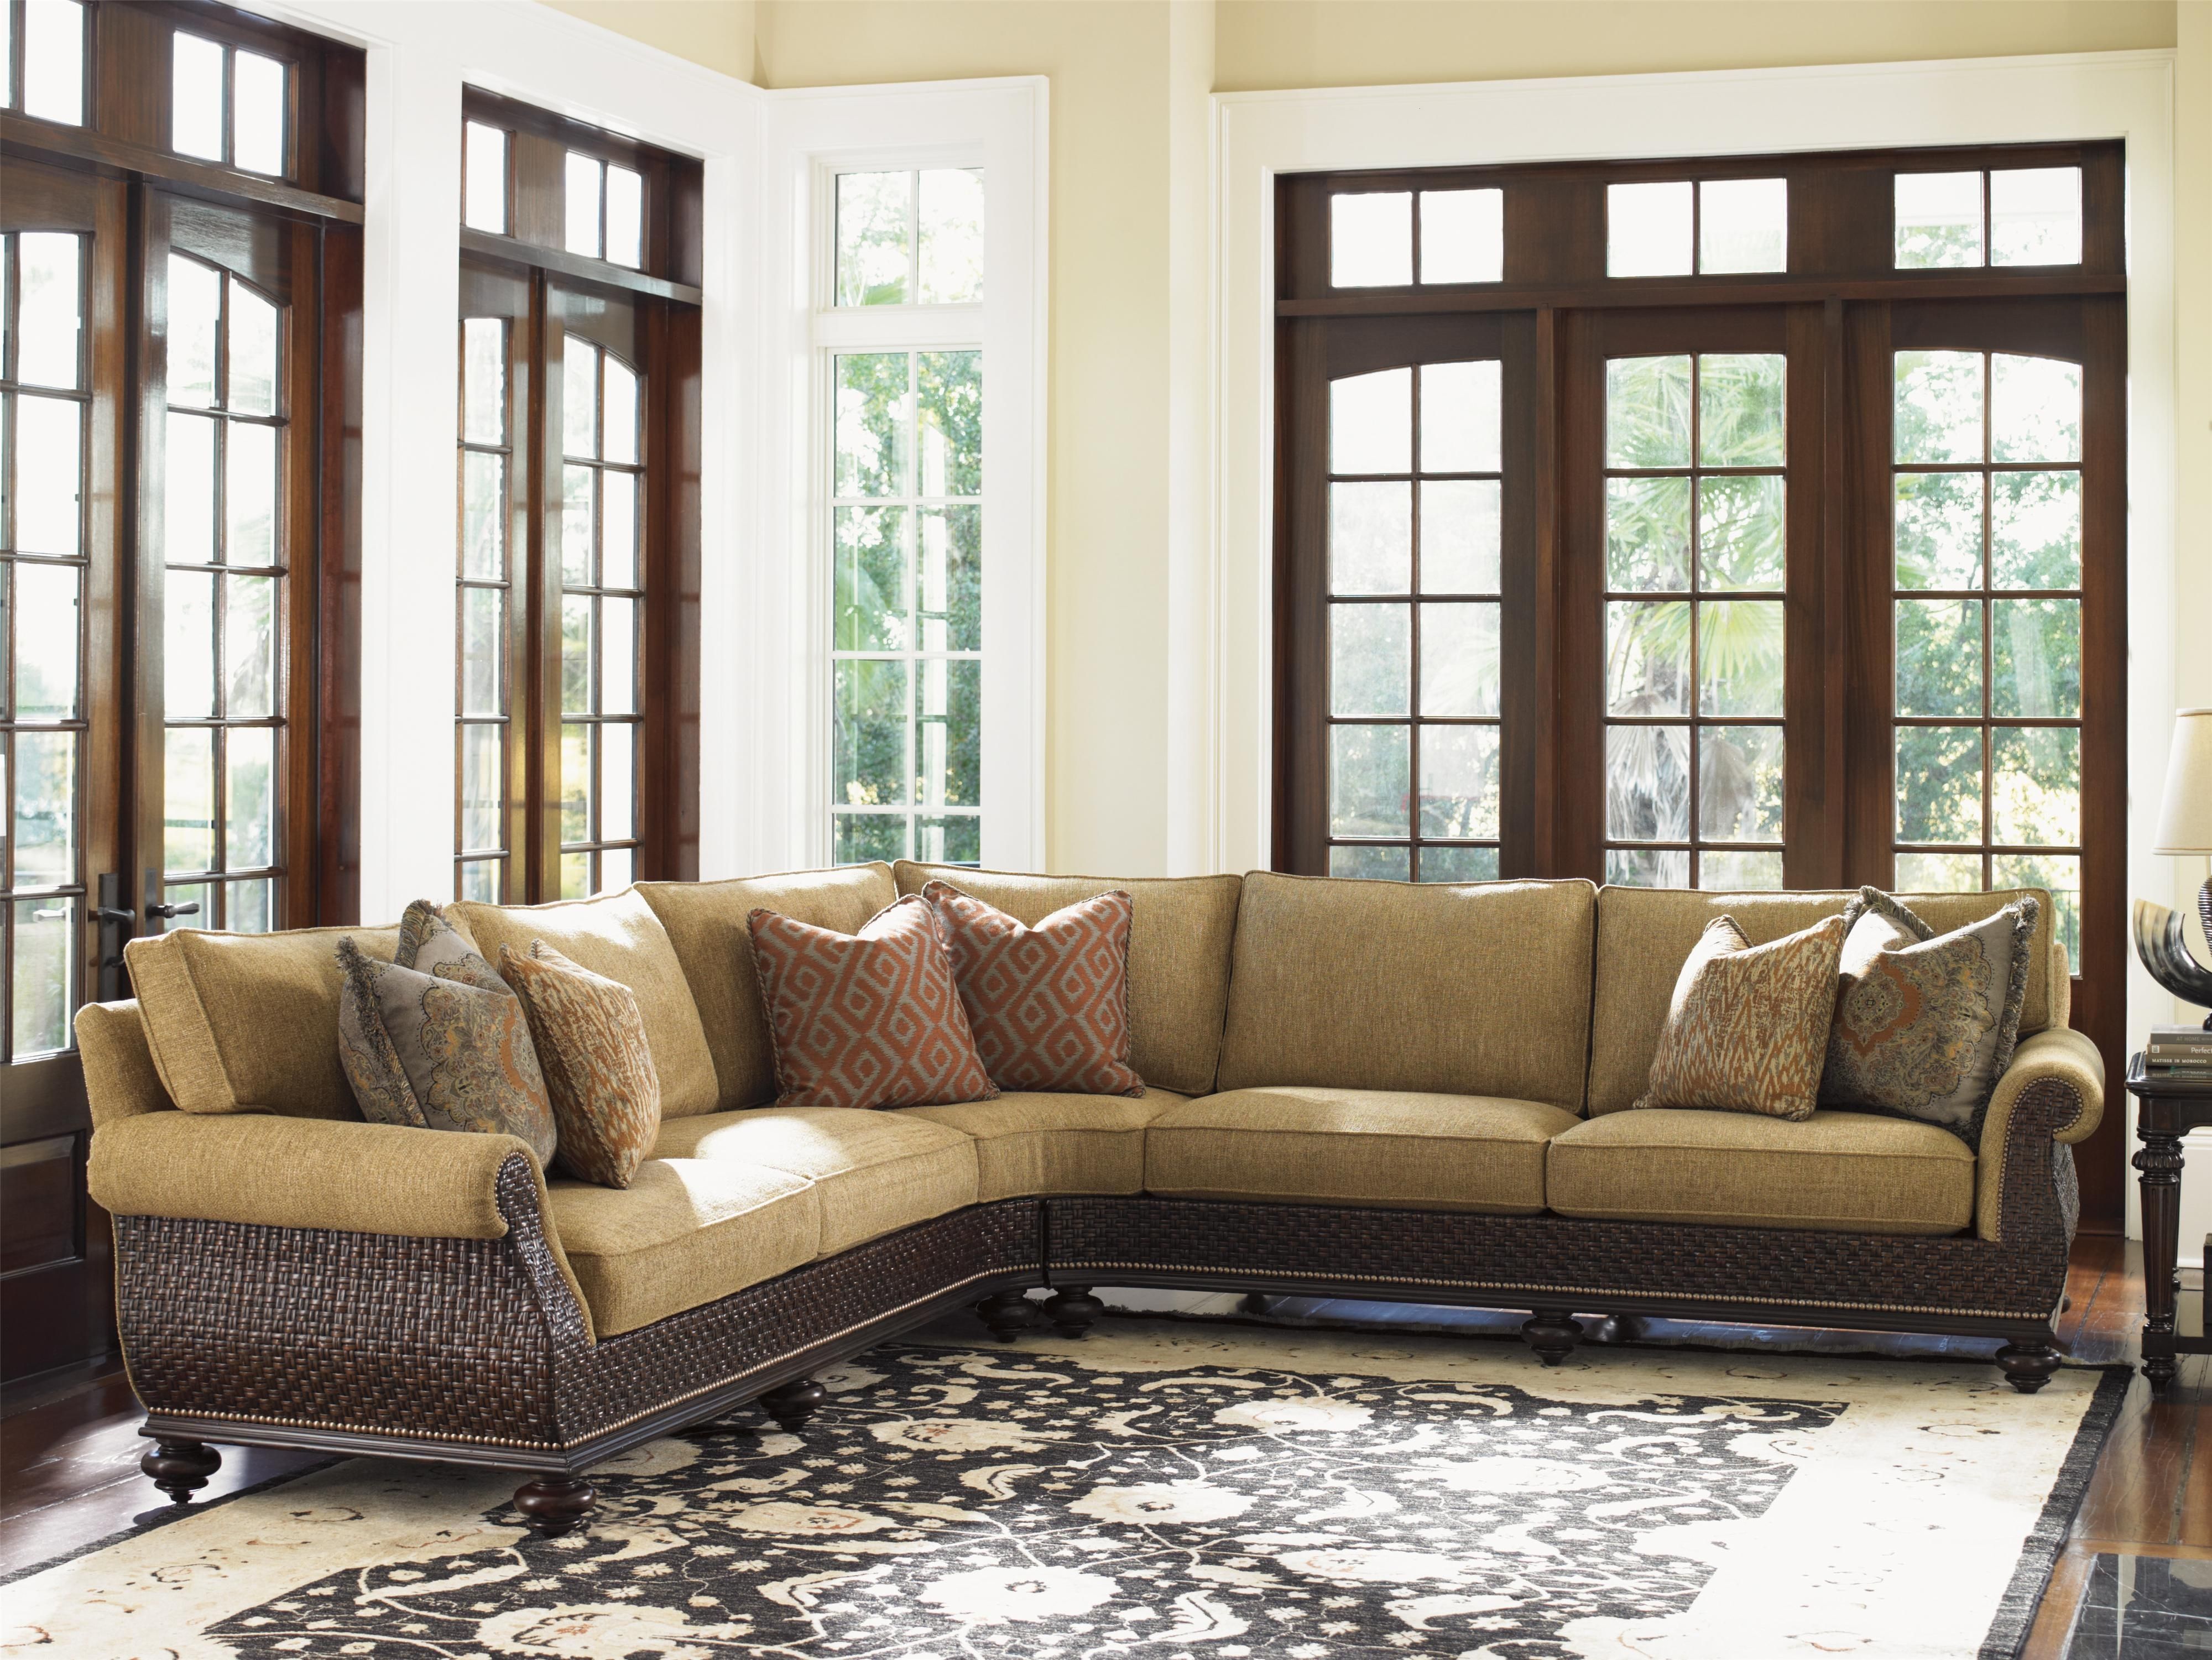 Tommy Bahama Home Island Traditions Westbury Sectional Sofa With Pertaining To Home Furniture Sectional Sofas (View 7 of 10)